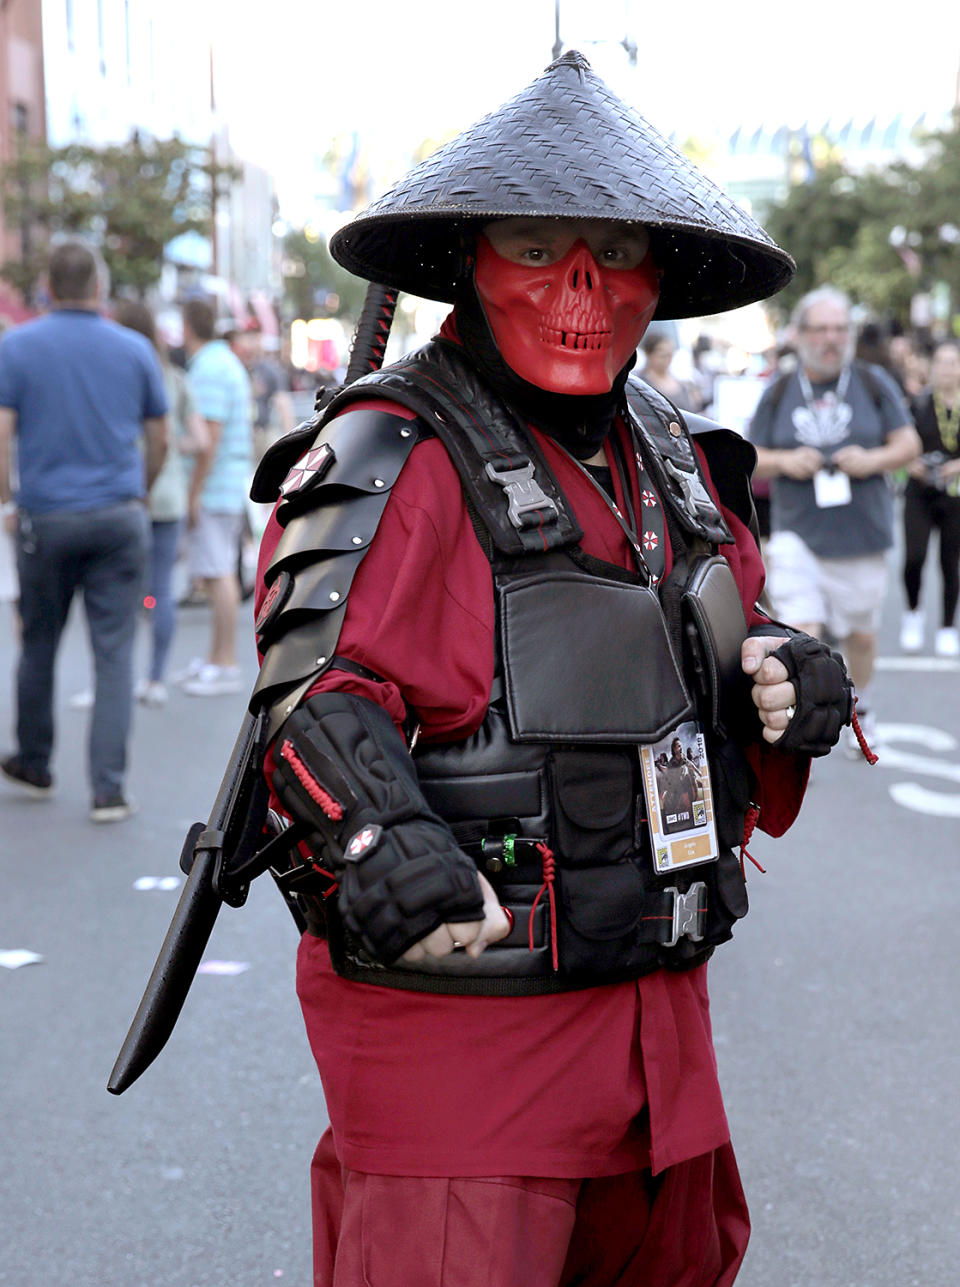 <p>Cosplayer dressed as a Mortal Kombat character at Comic-Con International on July 19, 2018, in San Diego. (Photo: Quinn P. Smith/Getty Images) </p>